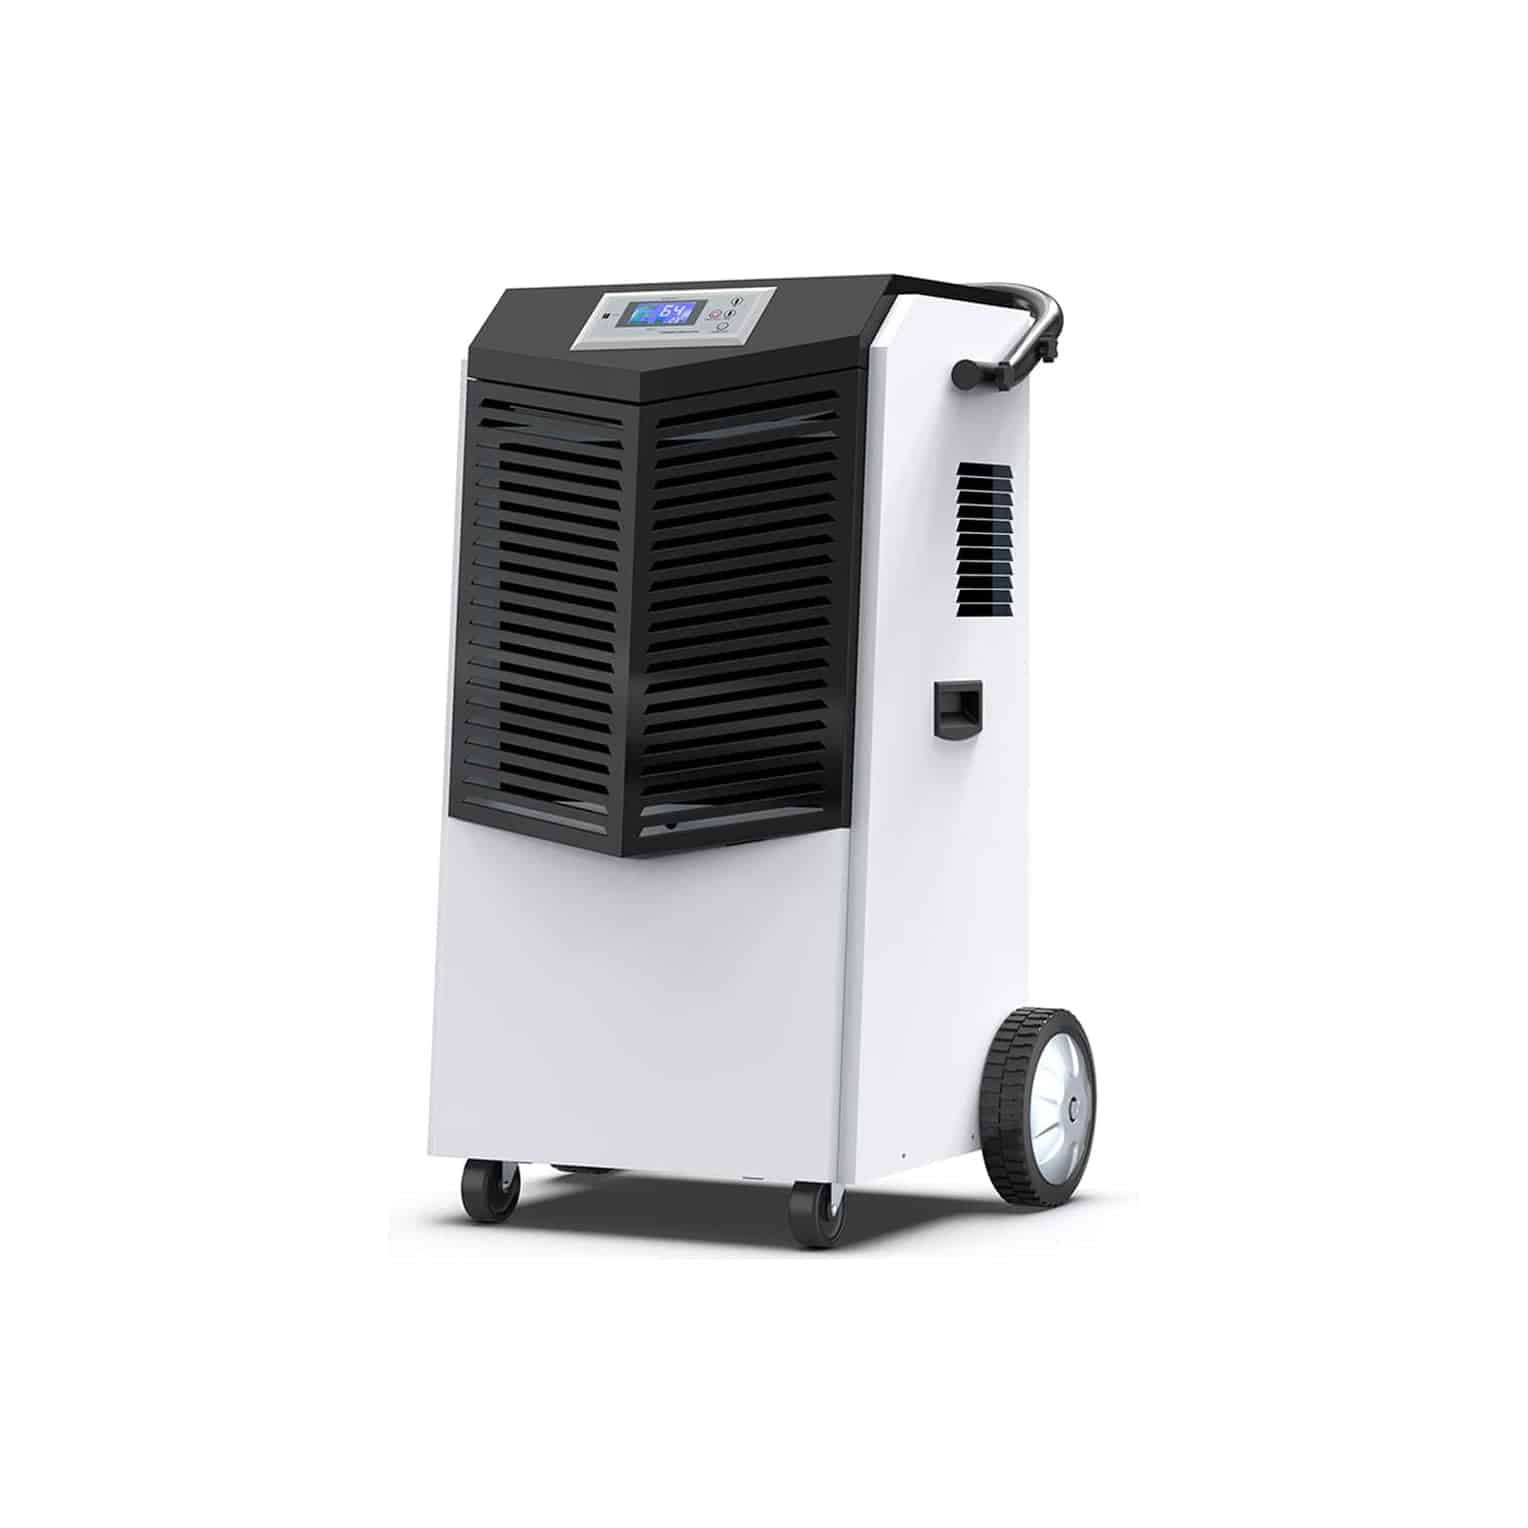 Top 10 Best Commercial Dehumidifiers in 2021 Reviews